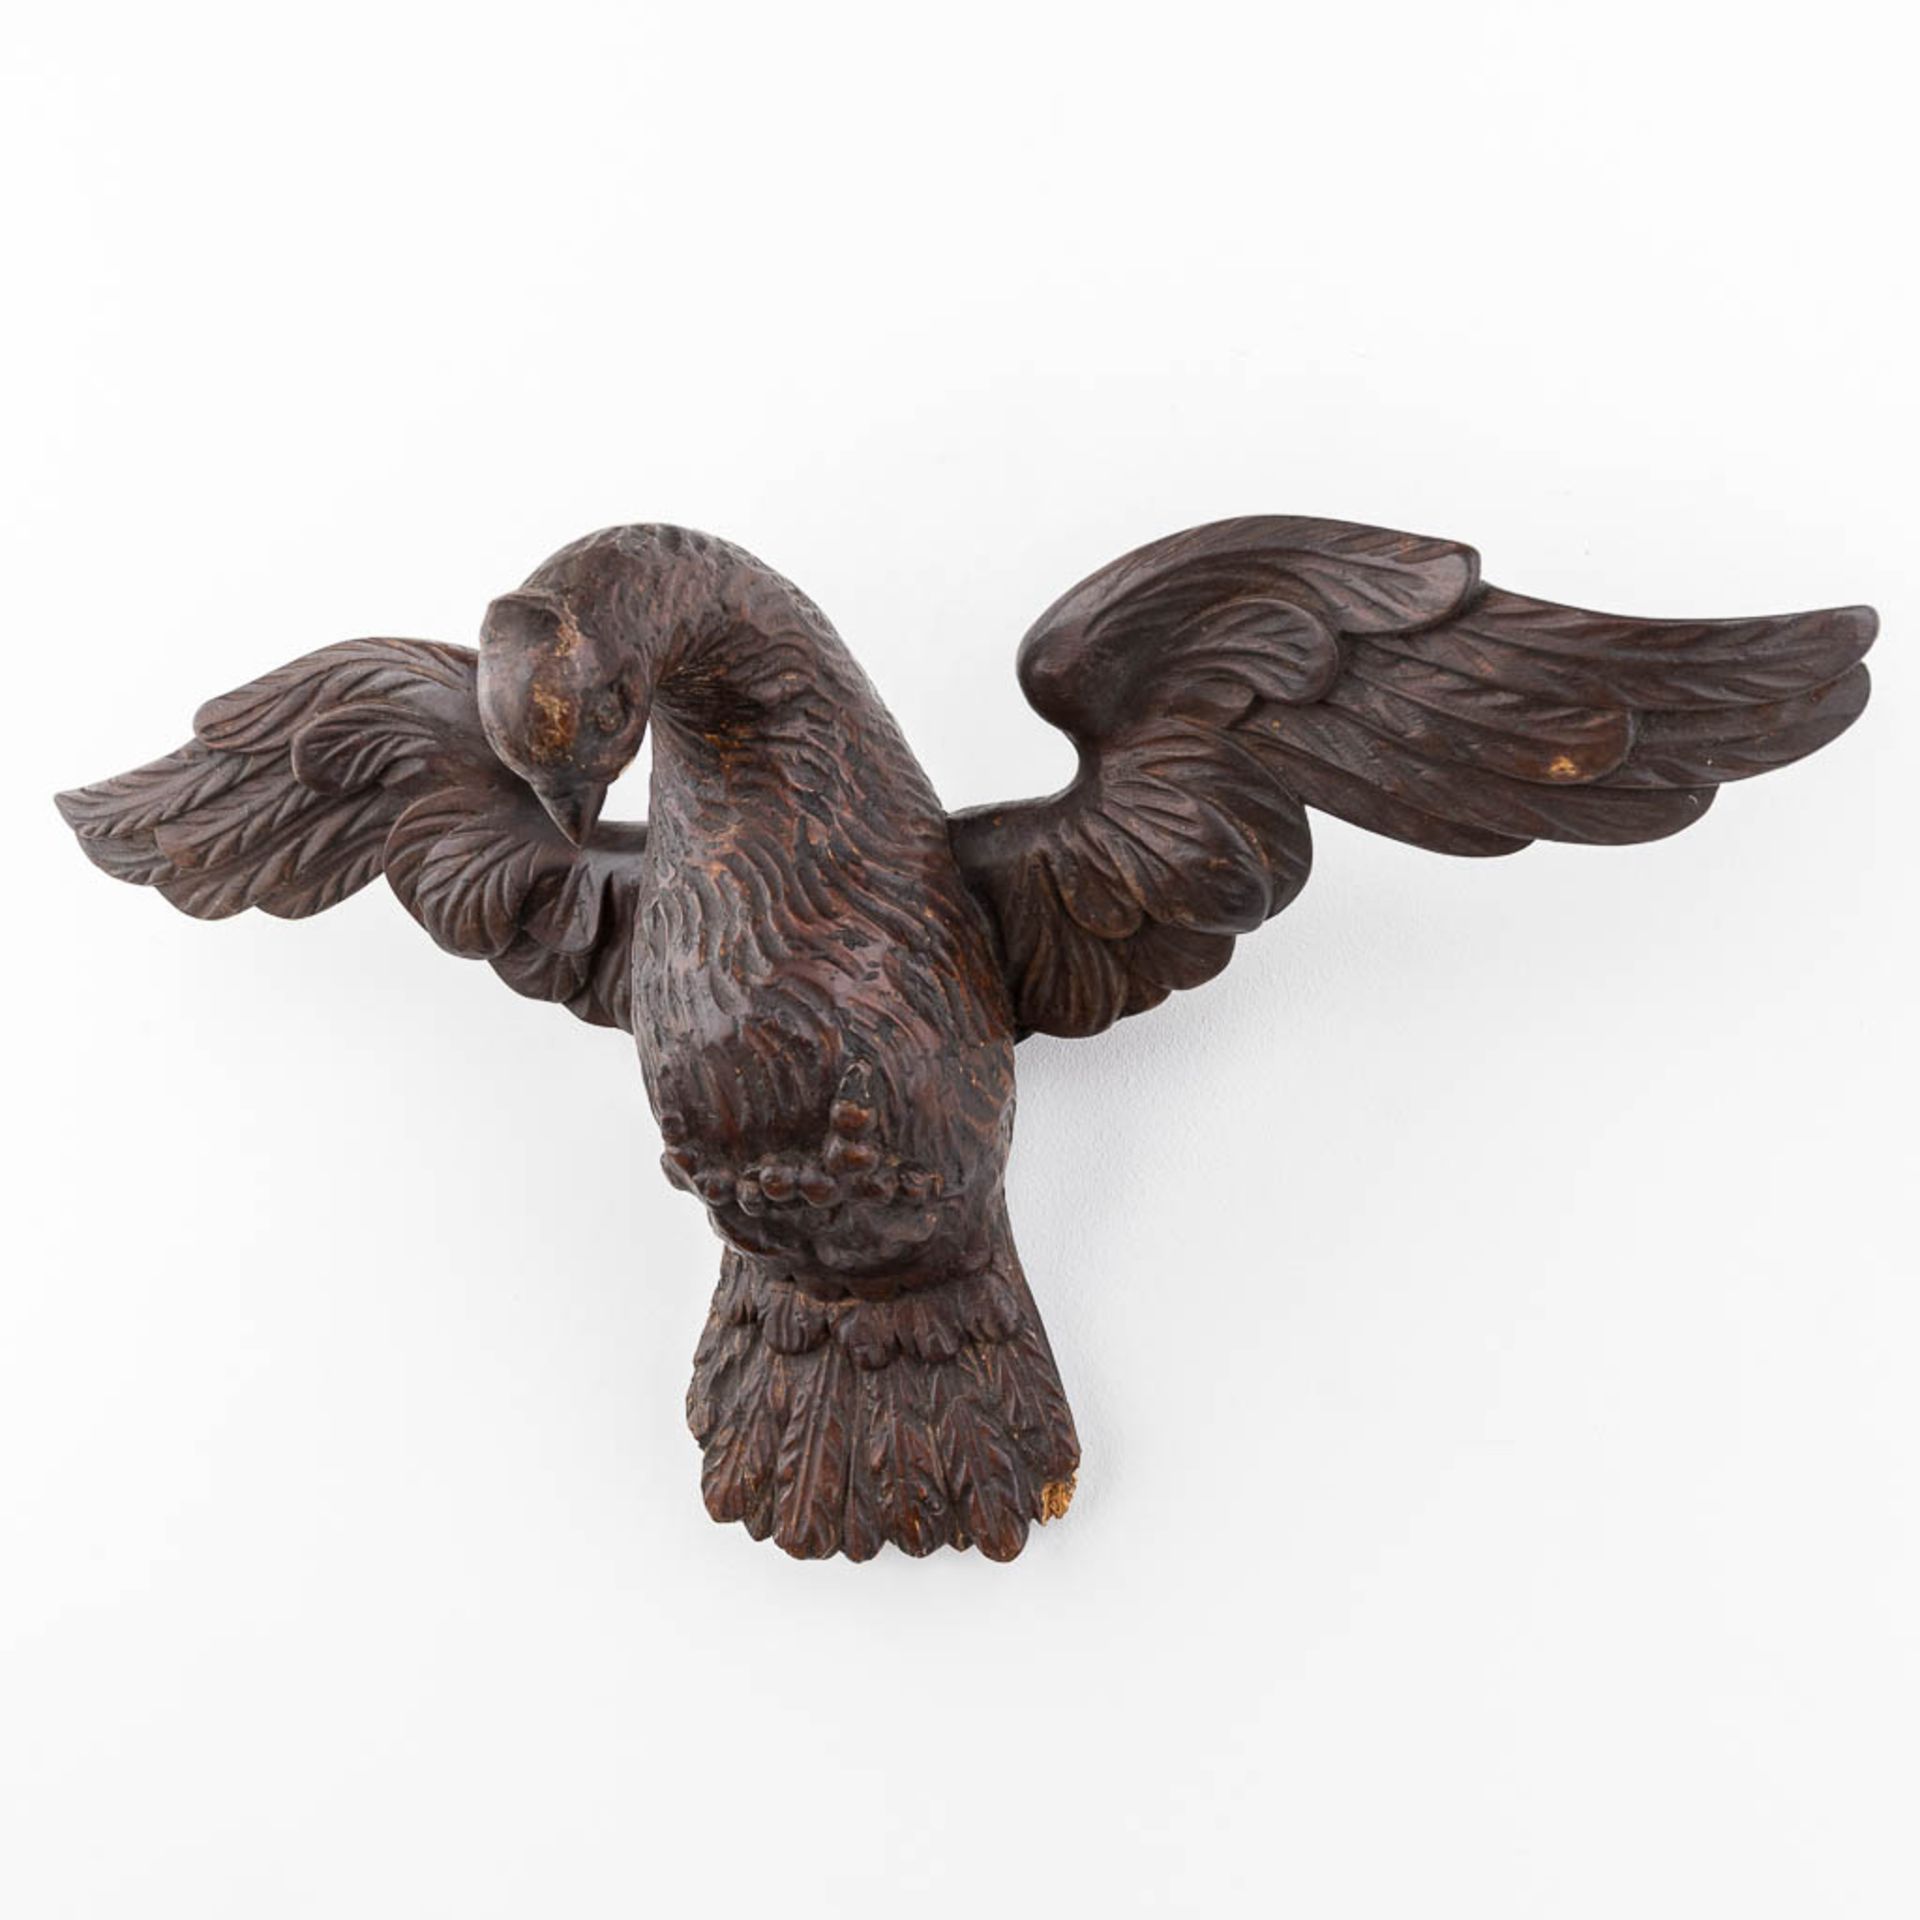 A wood-sculptured dove of peace, 19th century. (L: 12 x W: 45 x H: 25 cm) - Image 5 of 11